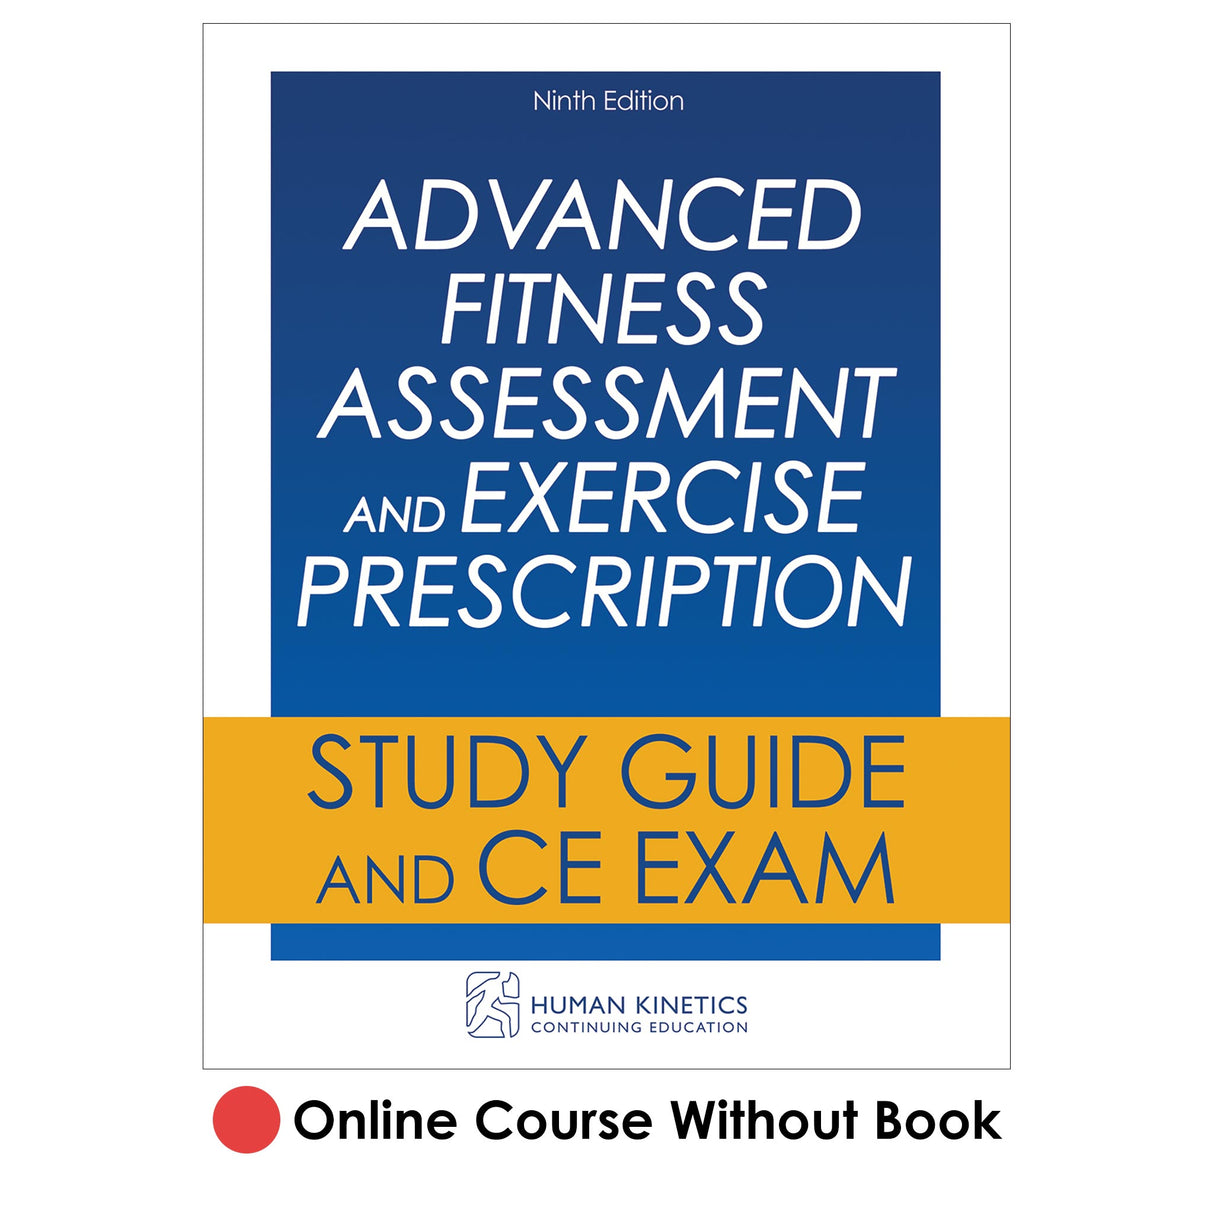 Advanced Fitness Assessment and Exercise Prescription 9th Edition Online CE Course Without Book